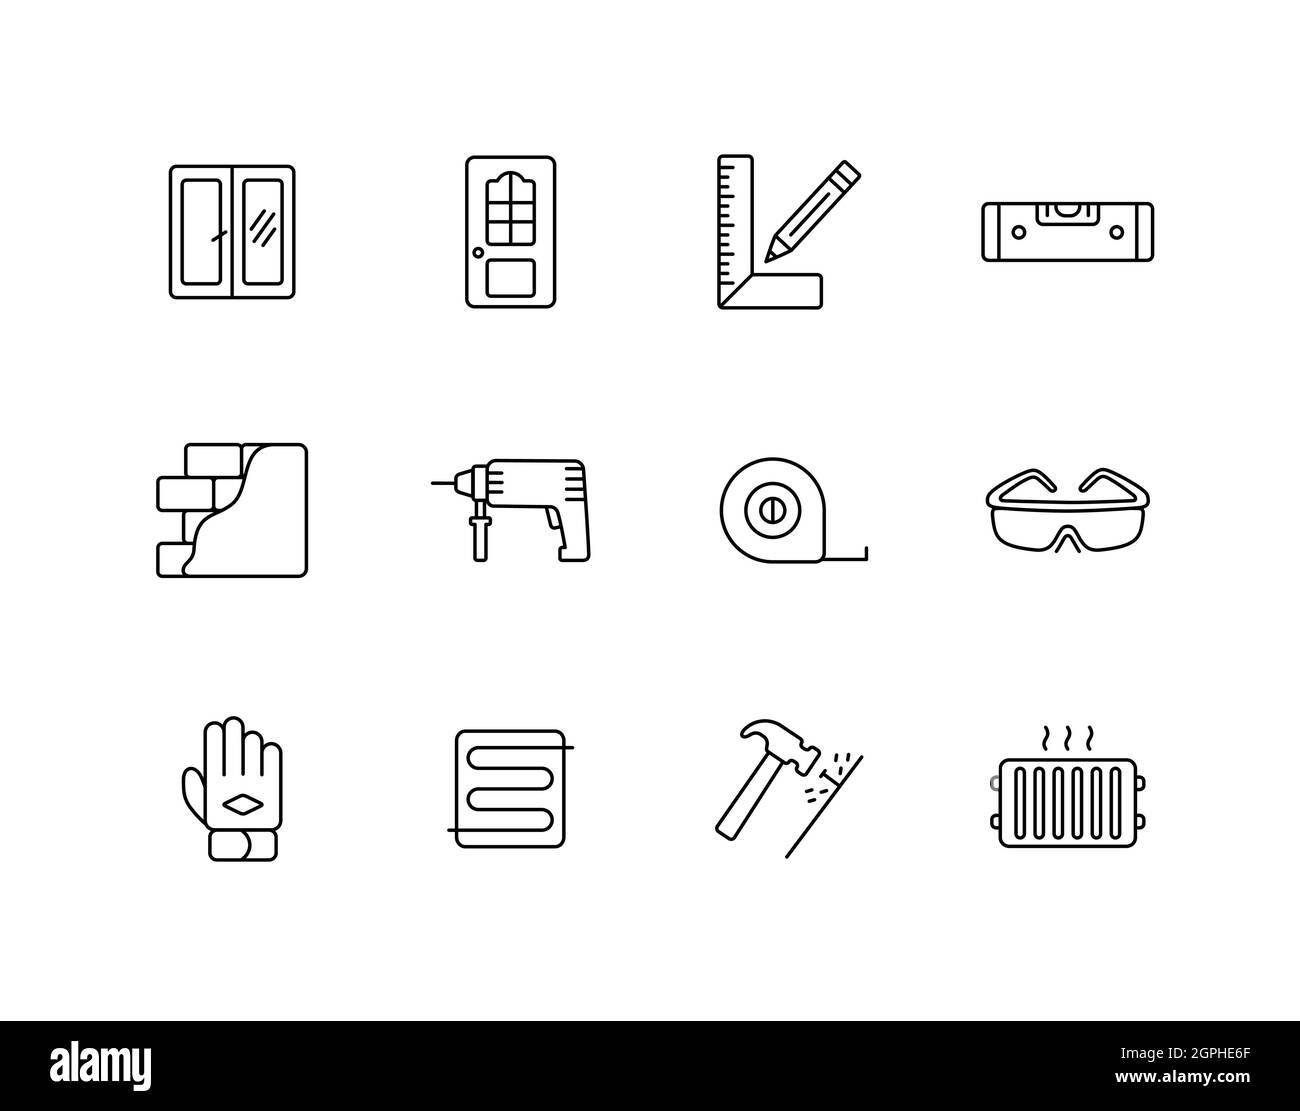 Set of building construction and home repair icons Stock Vector